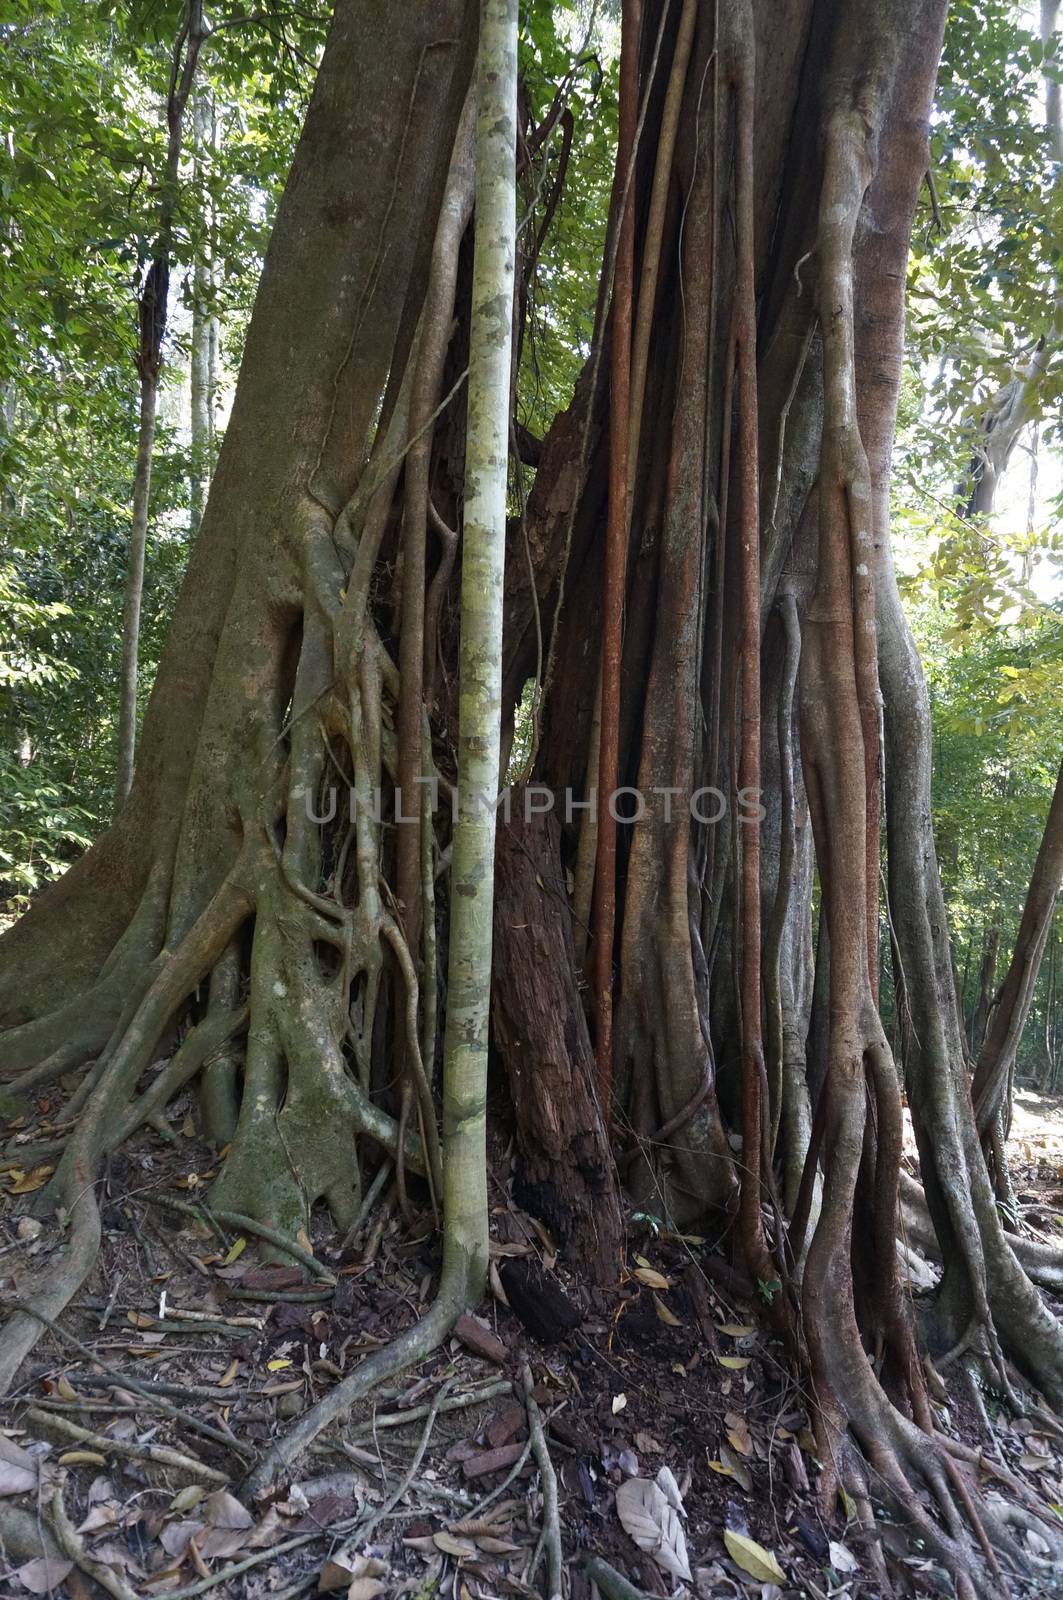 twisted tropical tree roots in rain forest.